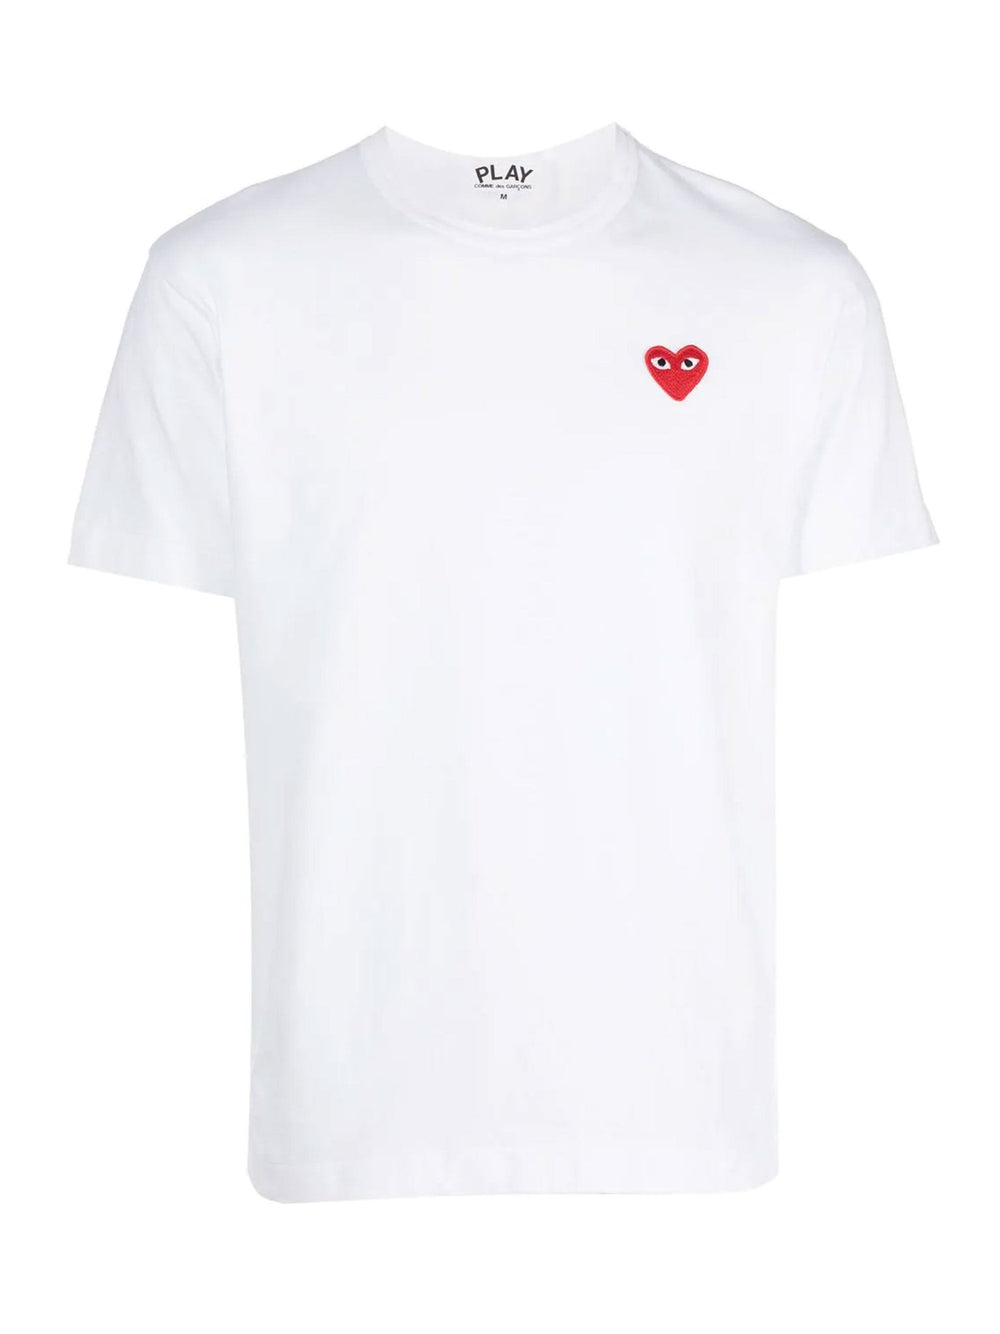 Probus COMMES DES GARCONS P1T108 PLAY T-SHIRT RED HEART WHITE COMMES DES GARCONS P1T108 PLAY T-SHIRT RED HEART WHITE S